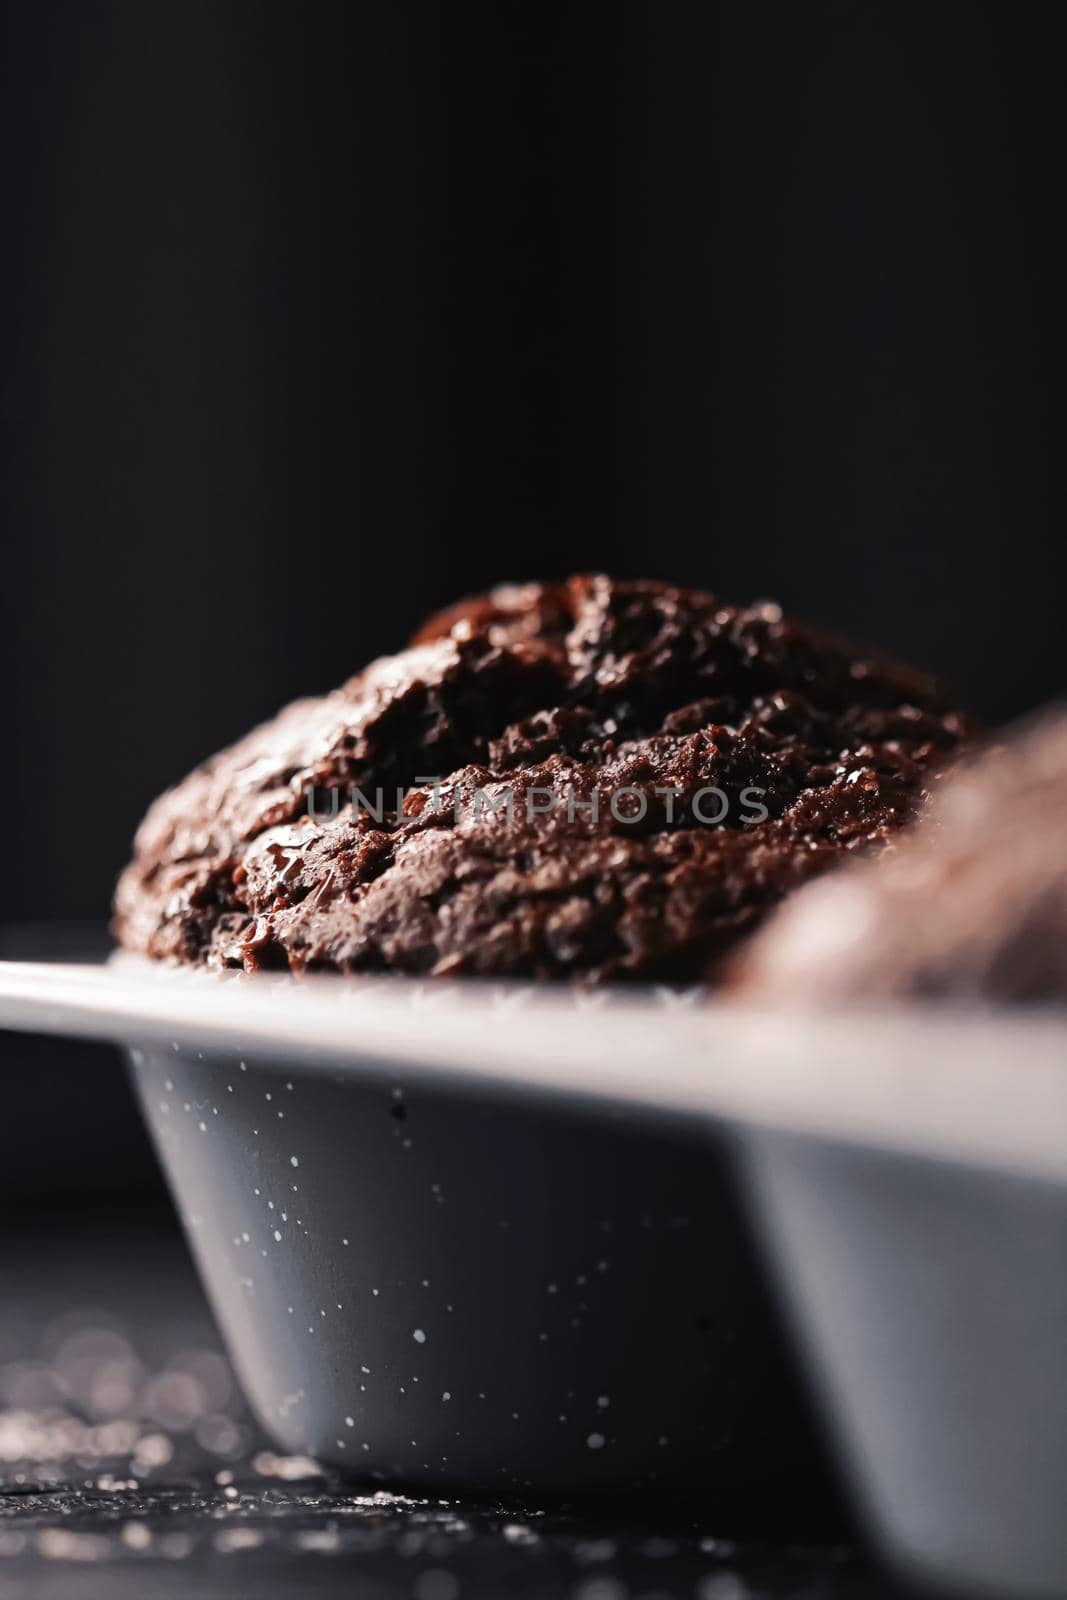 Just baked chocolate muffins in tray, homemade comfort food recipe by Anneleven